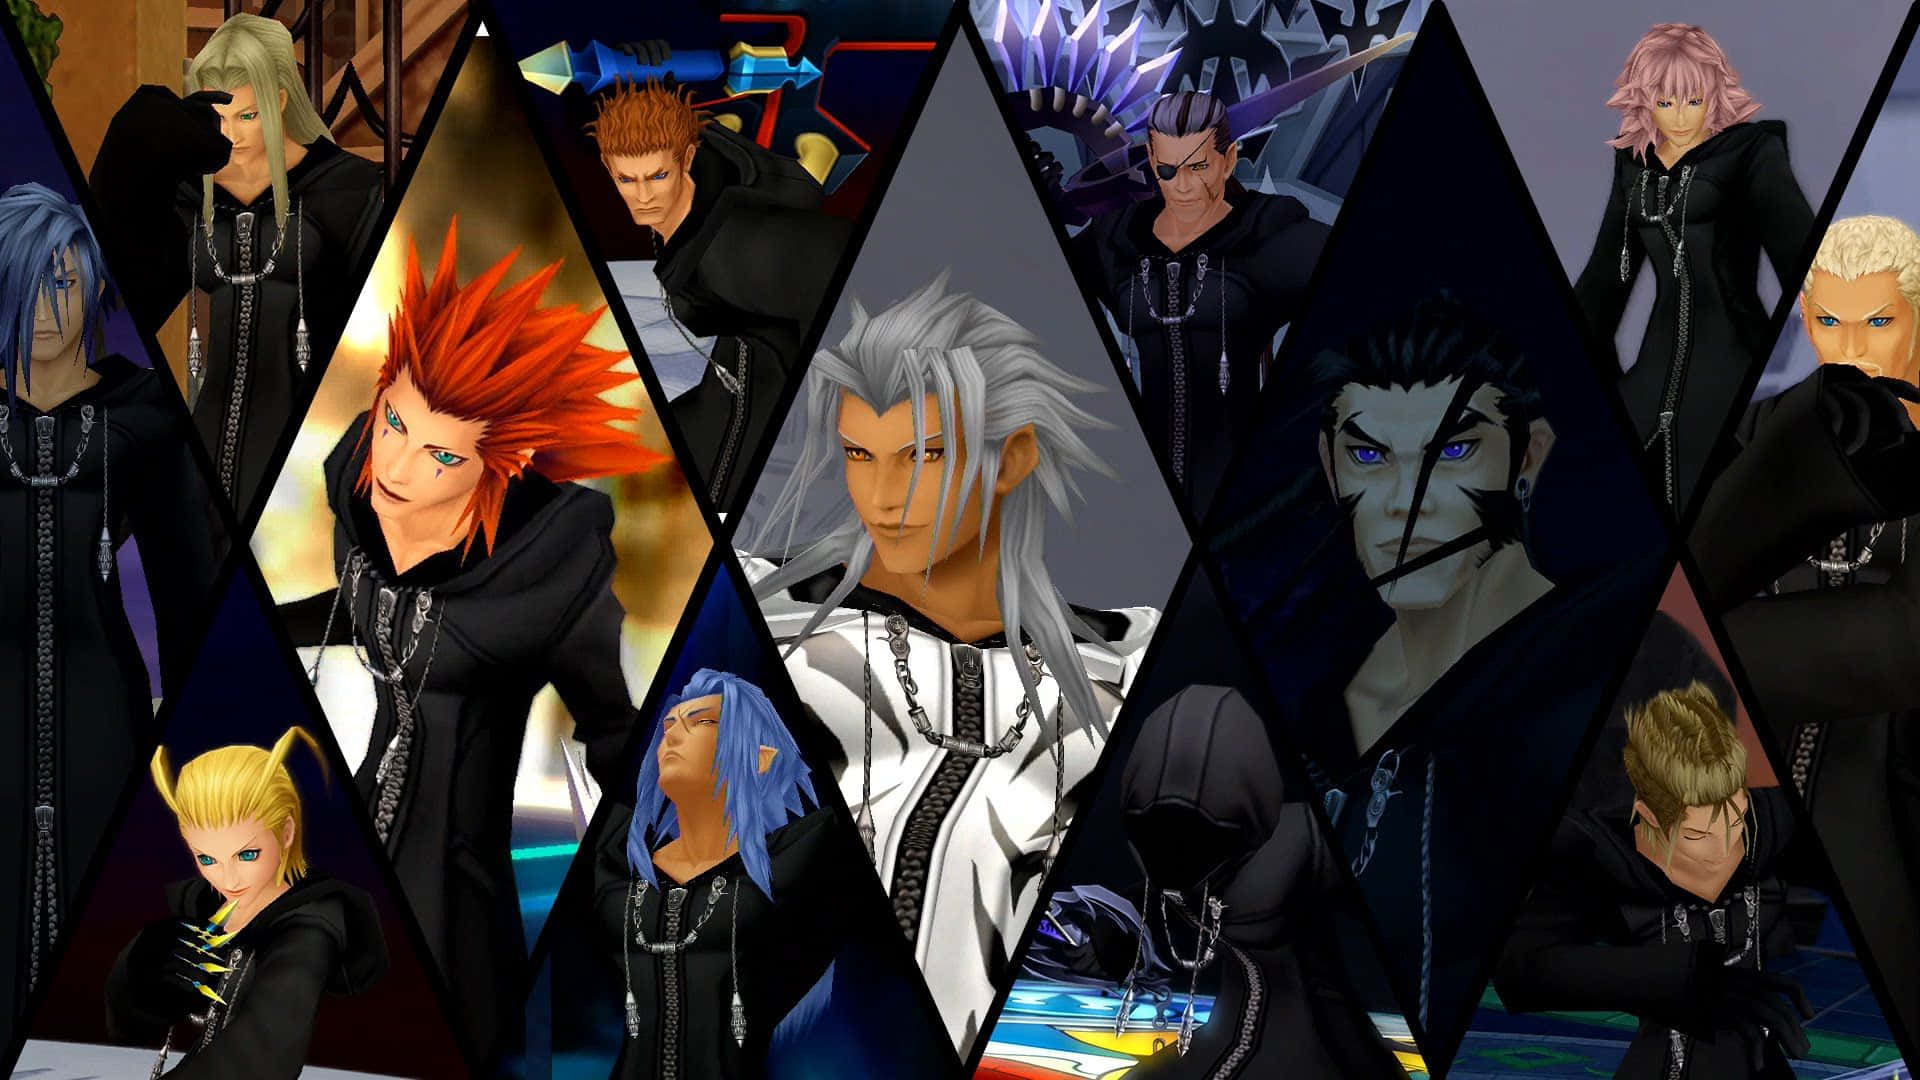 Kingdom Hearts Organization XIII assembling in the dark, united by their iconic black hooded coats Wallpaper